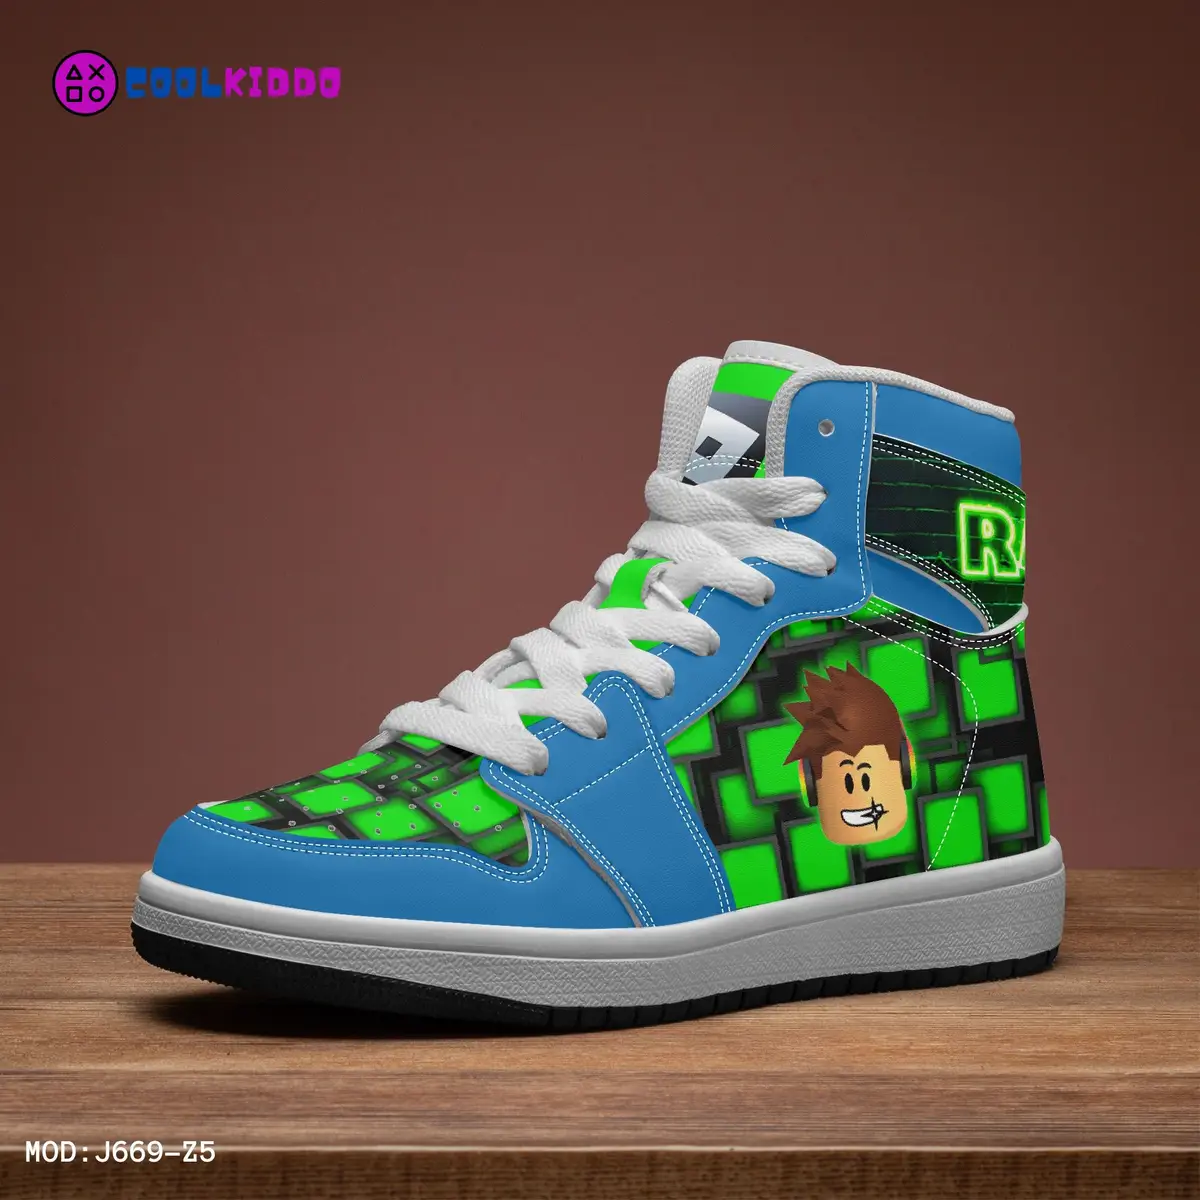 Kids ROBLOX Characters High-Top Shoes Leather Green and Blue, Jordans Style Sneakers Cool Kiddo 24